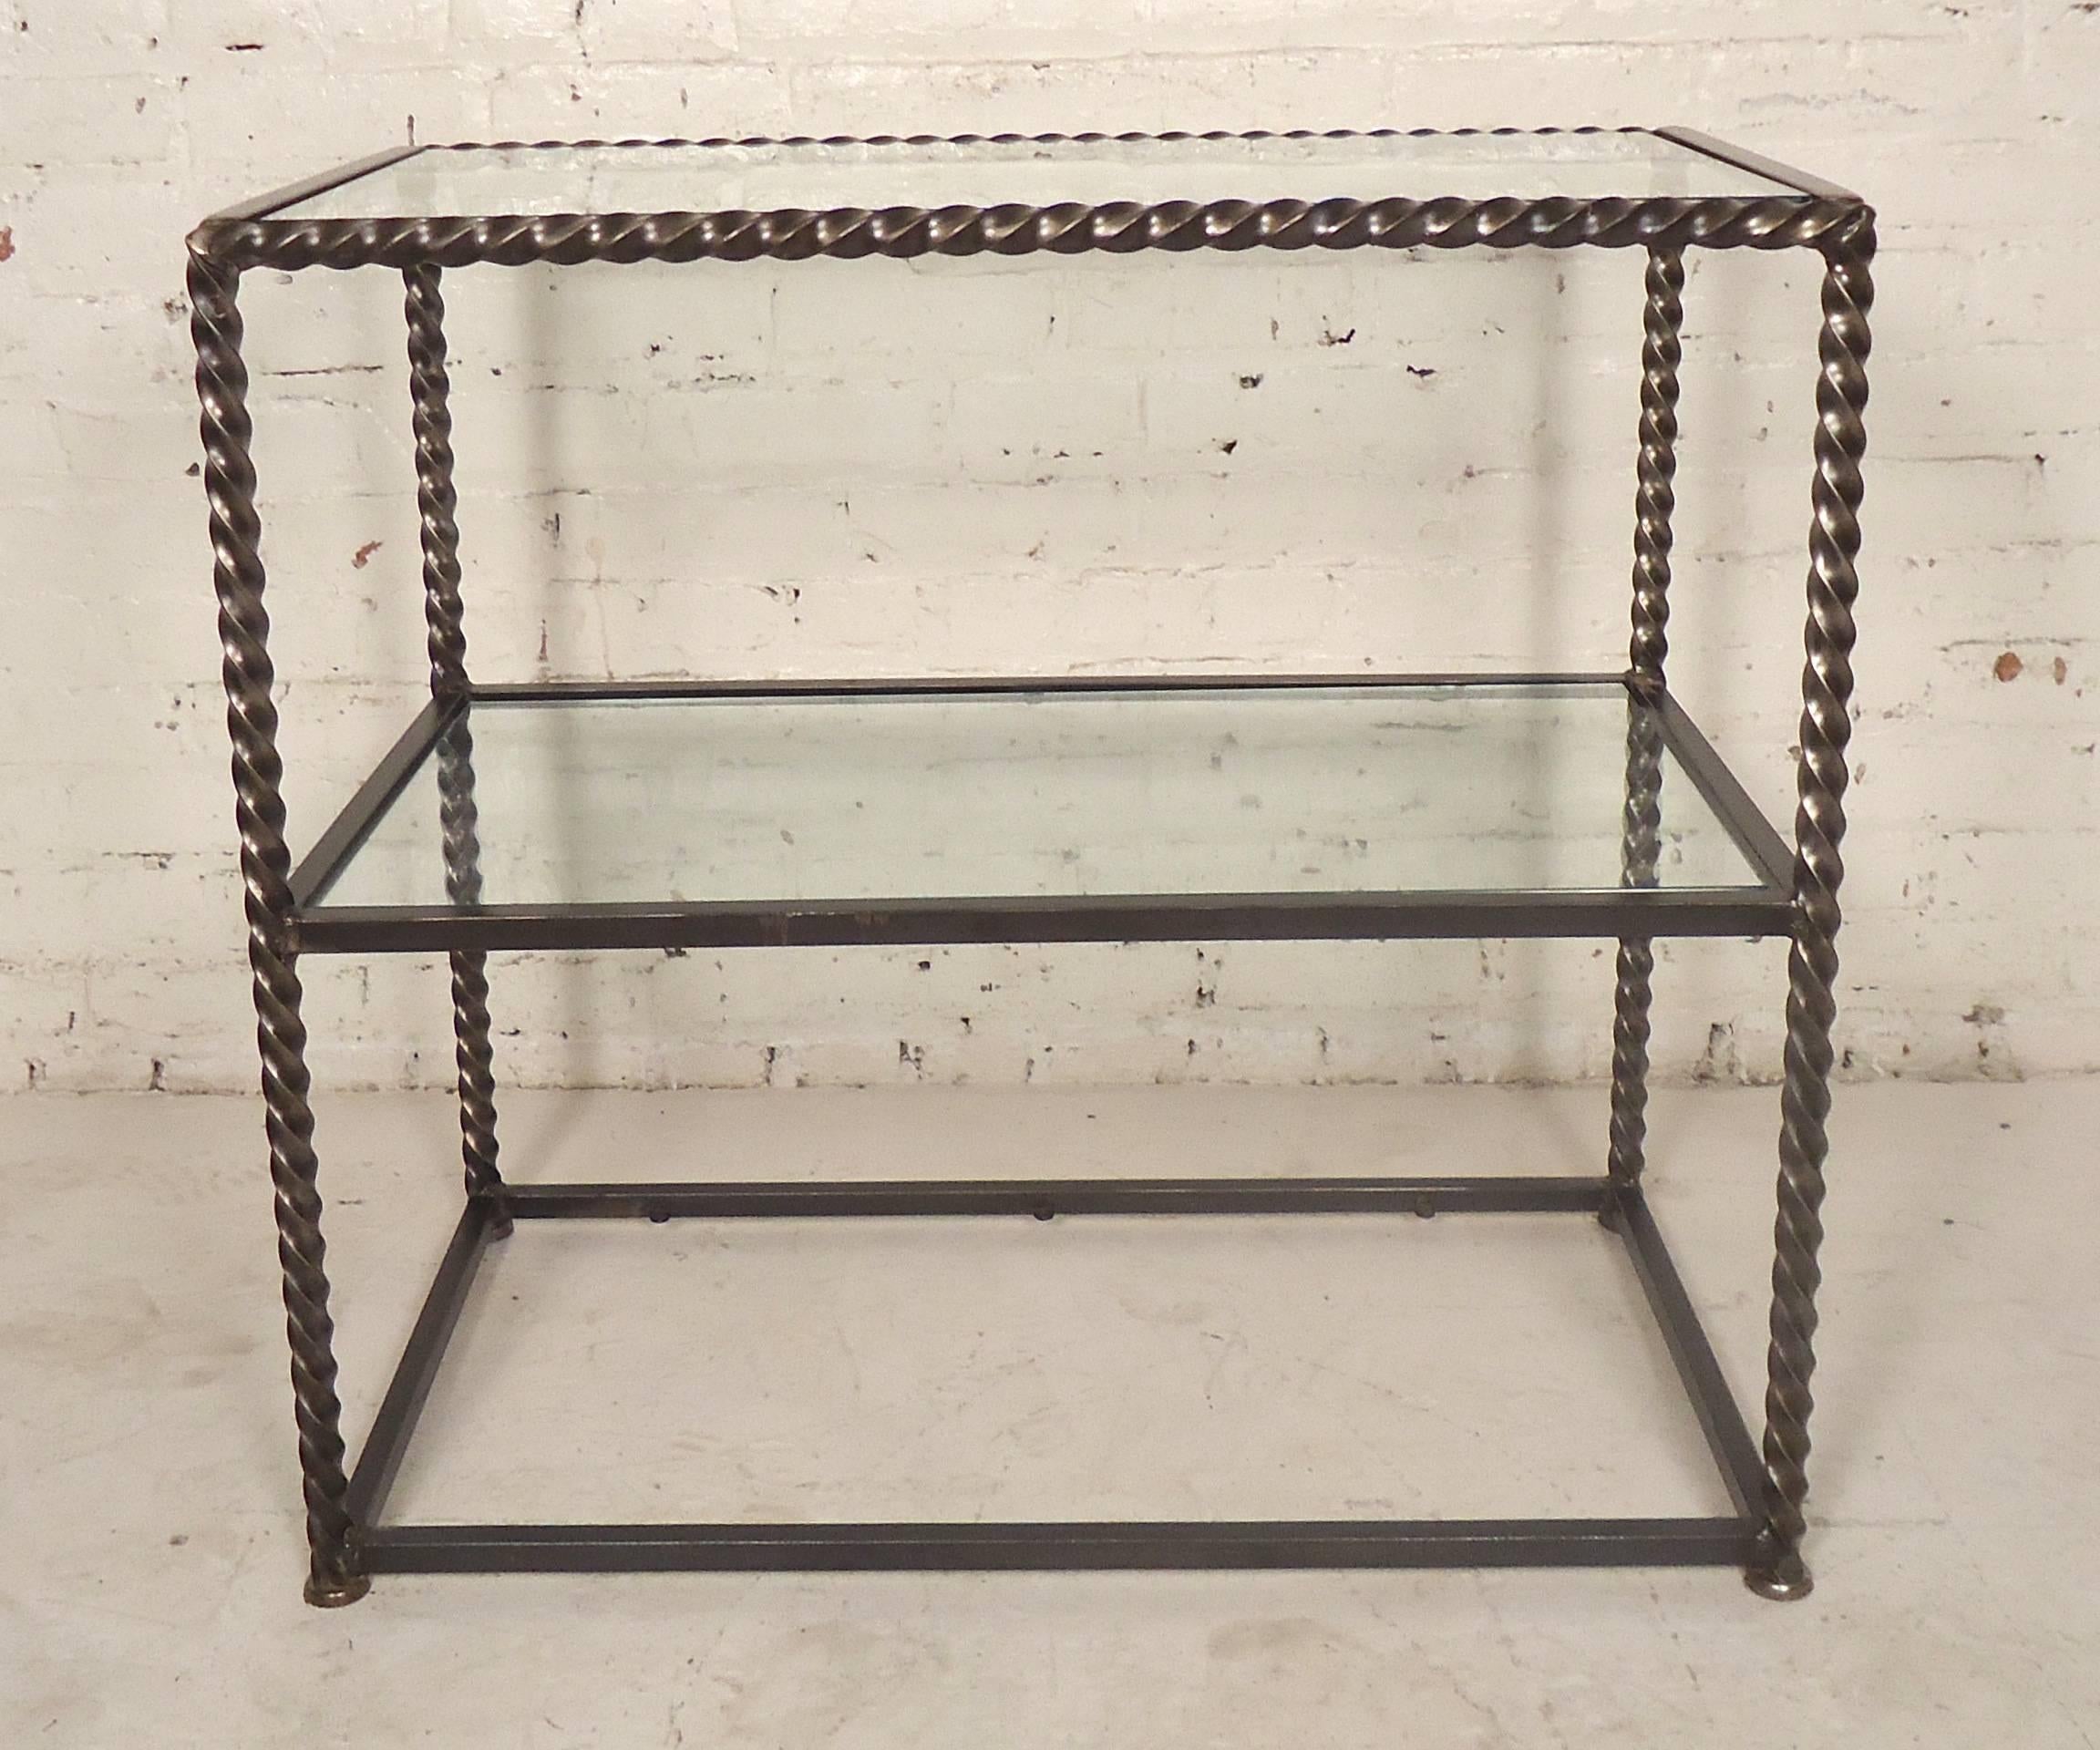 Heavy metal table with glass, featuring a handsome Industrial bare metal style finish. Three glass shelves can be placed. Great for entry way or as a standing bar.

(Please confirm item location, NY or NJ, with dealer).
 